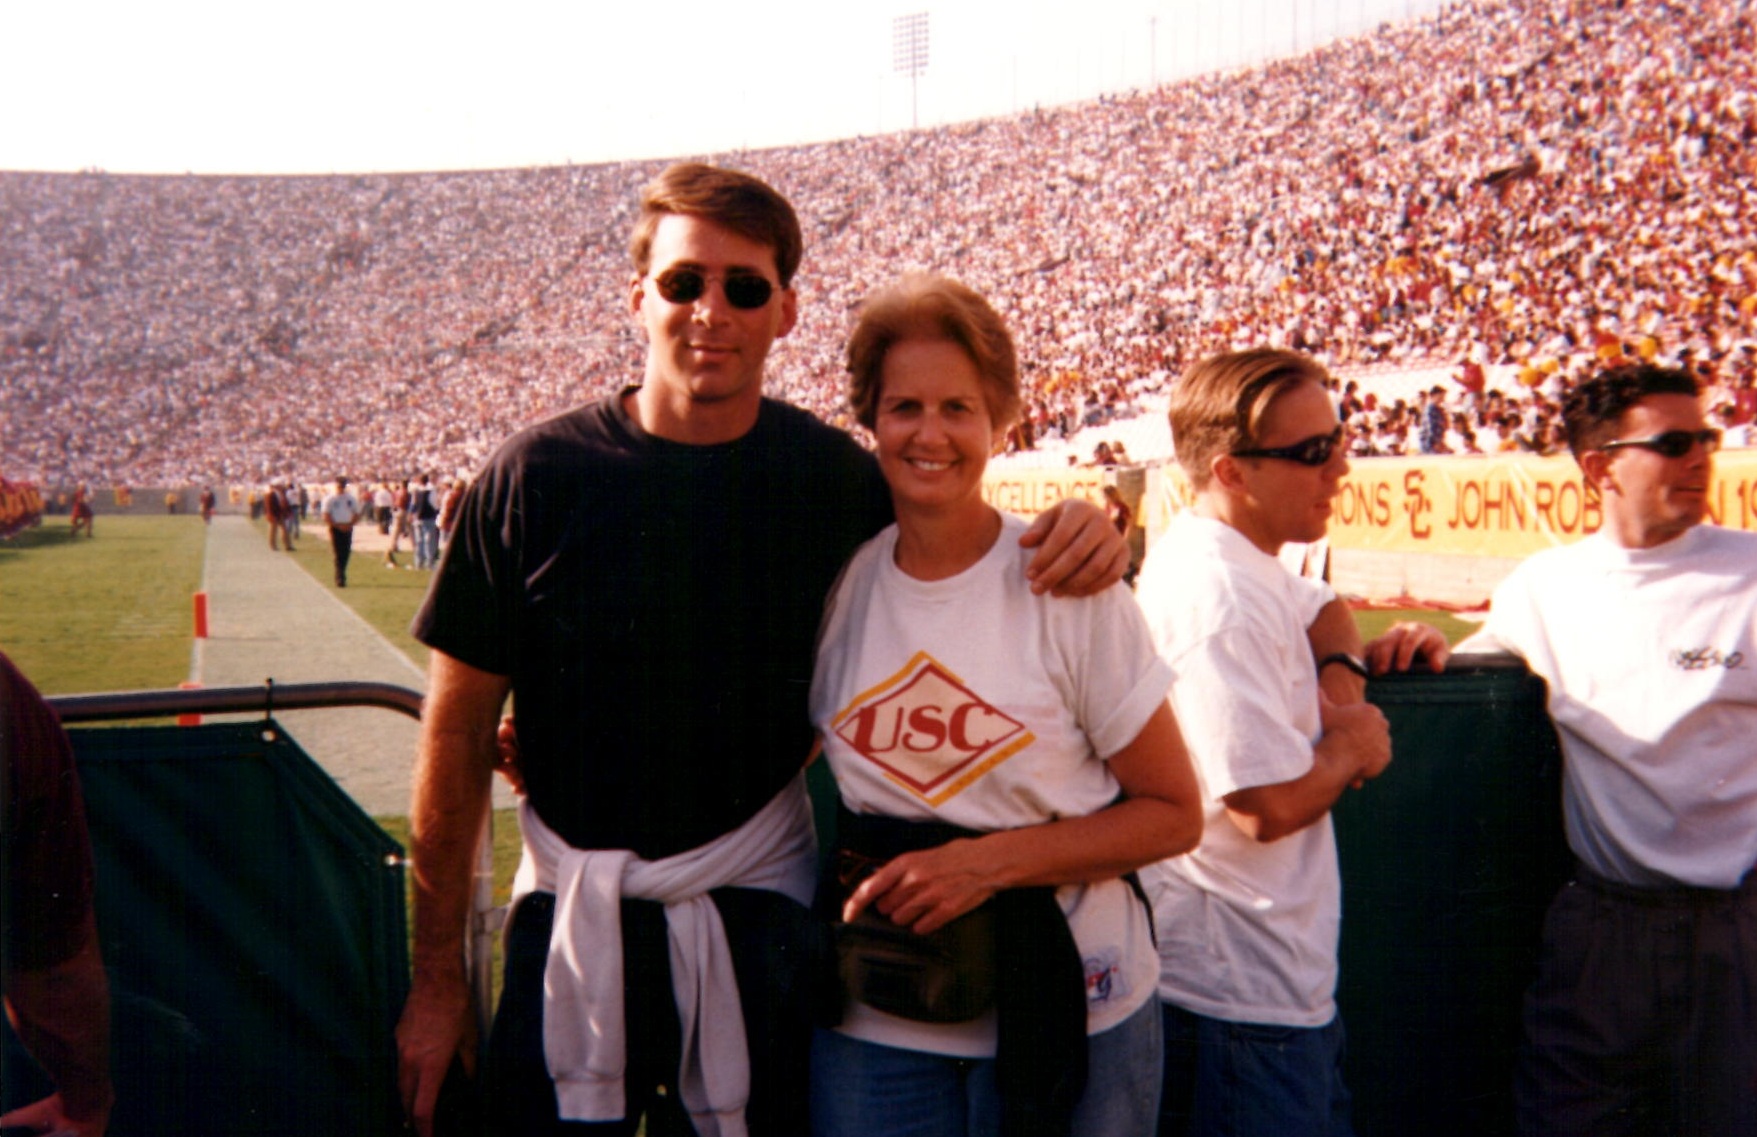 Mom and I at the Coliseum